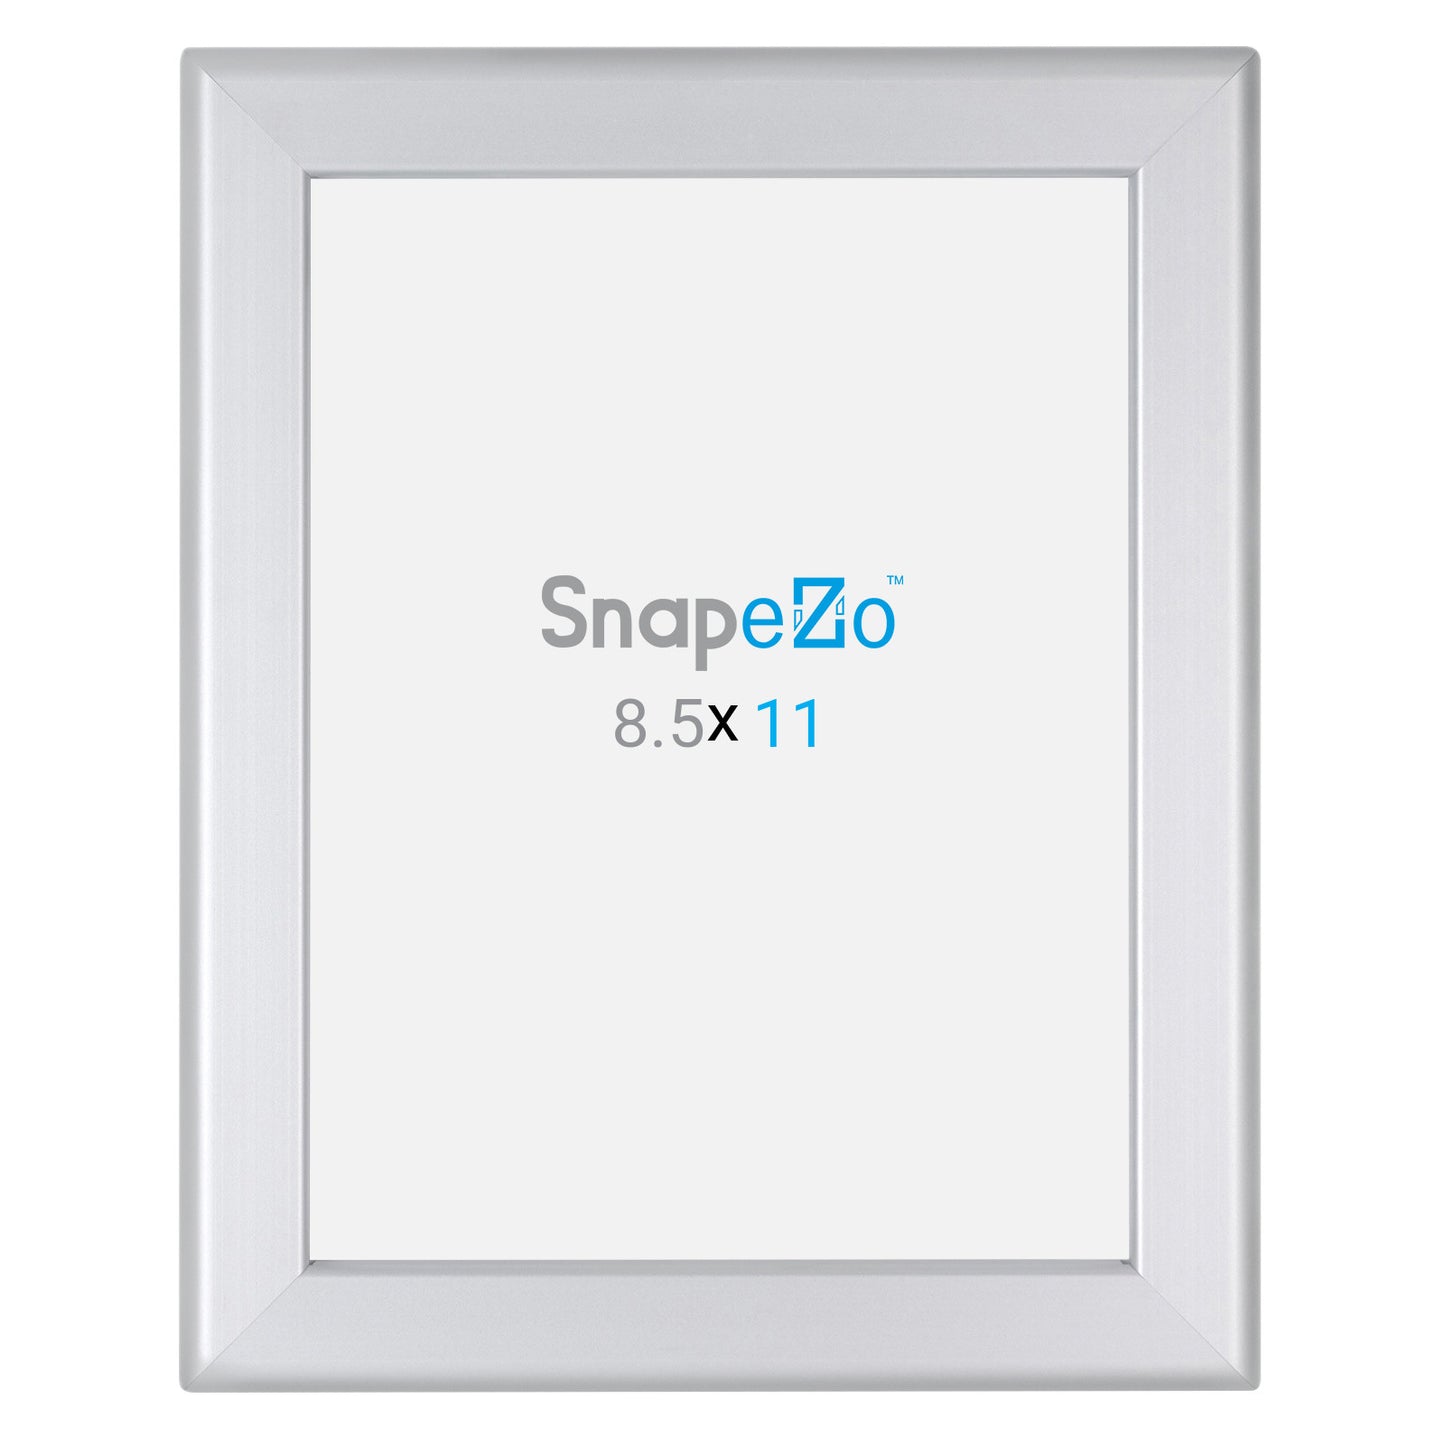 10 Case Pack of Snapezo® of Silver 8.5x11 Weather-Resistant Certificate Frame - 1.38" Profile